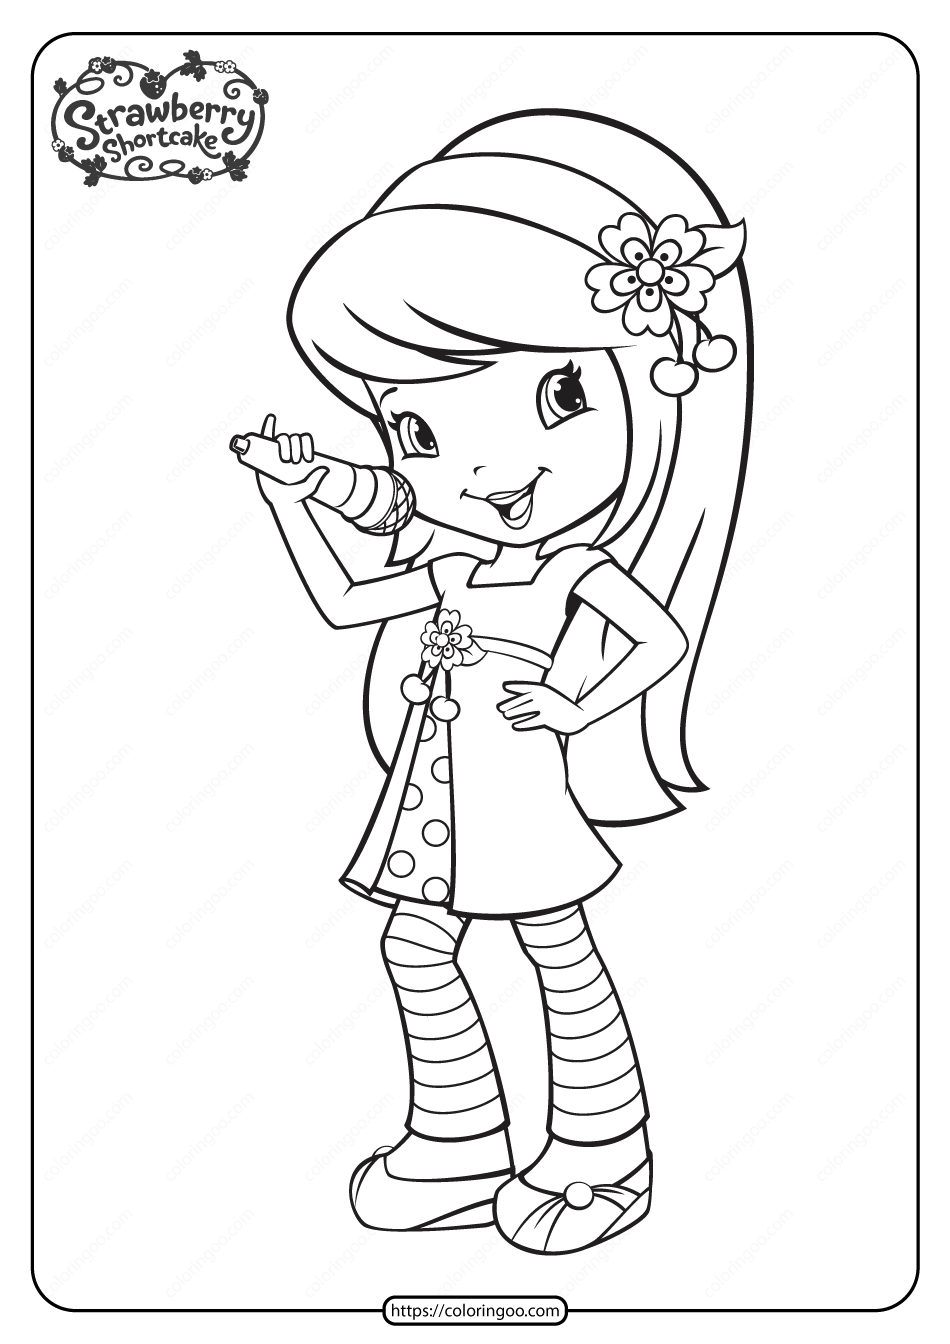 Printable Cherry Jam Sings the Song Coloring Page